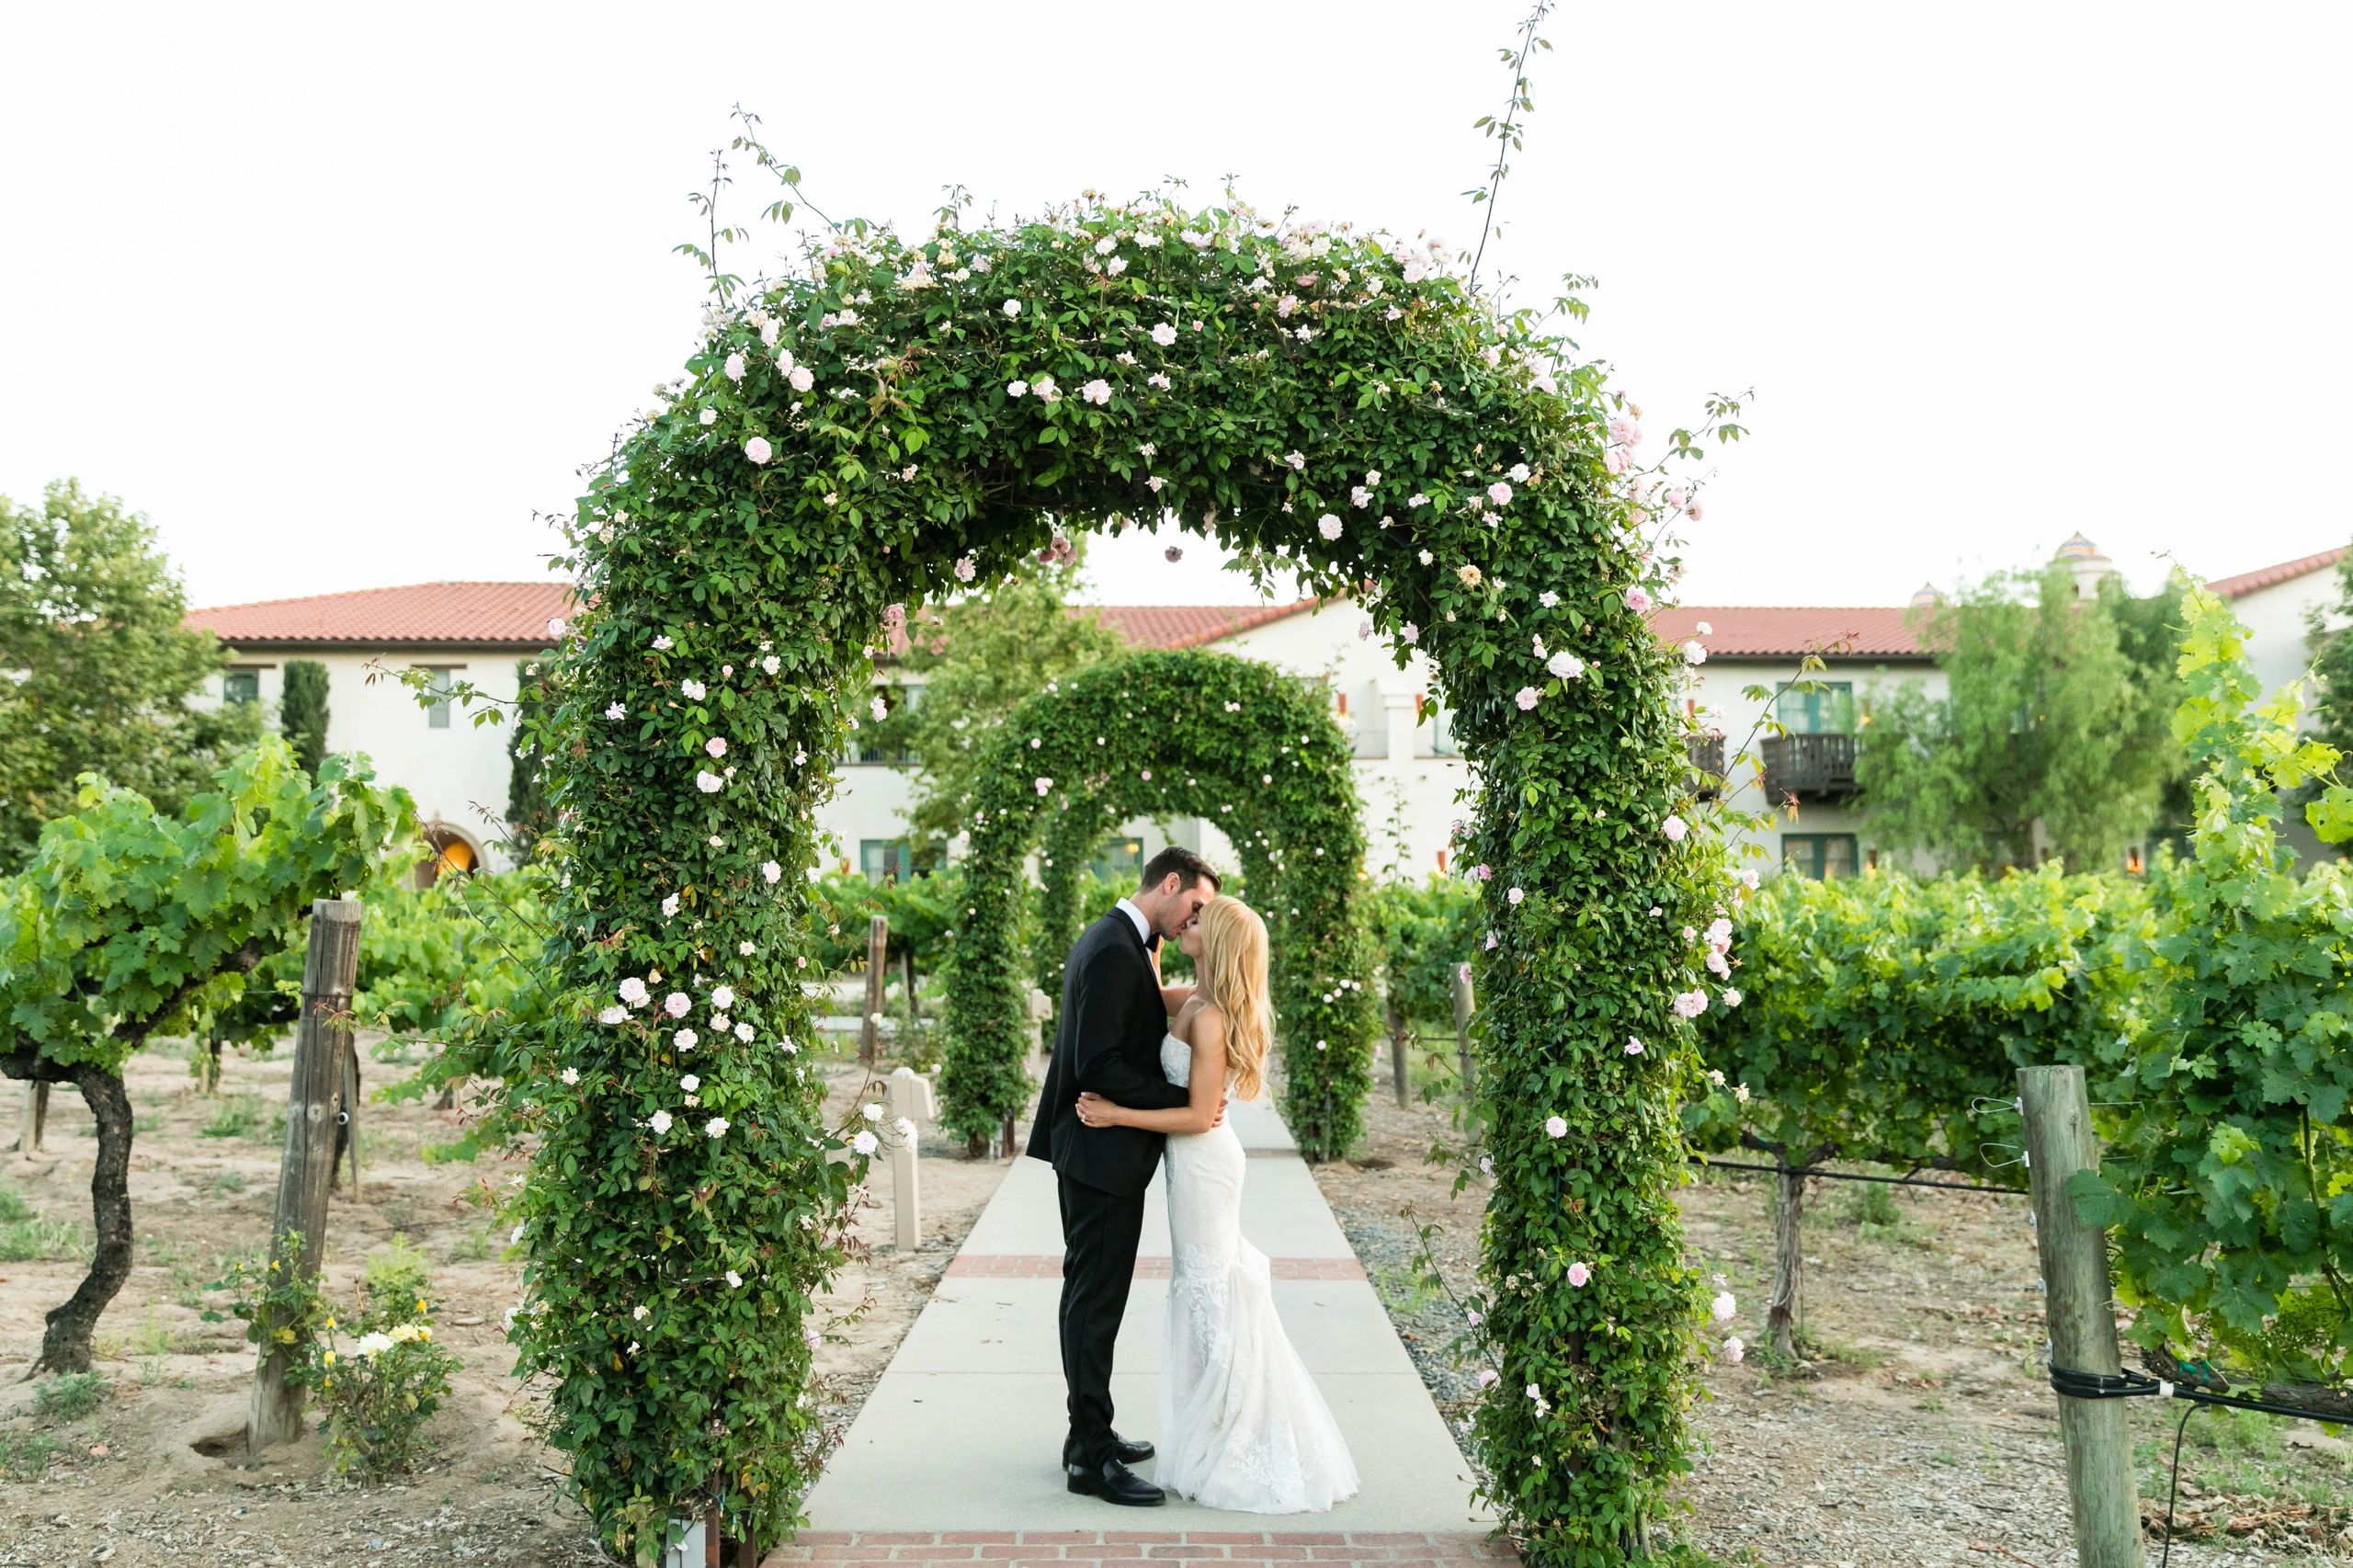 Leah Marie Photography, Michelle Garibay Events, Ponte Winery